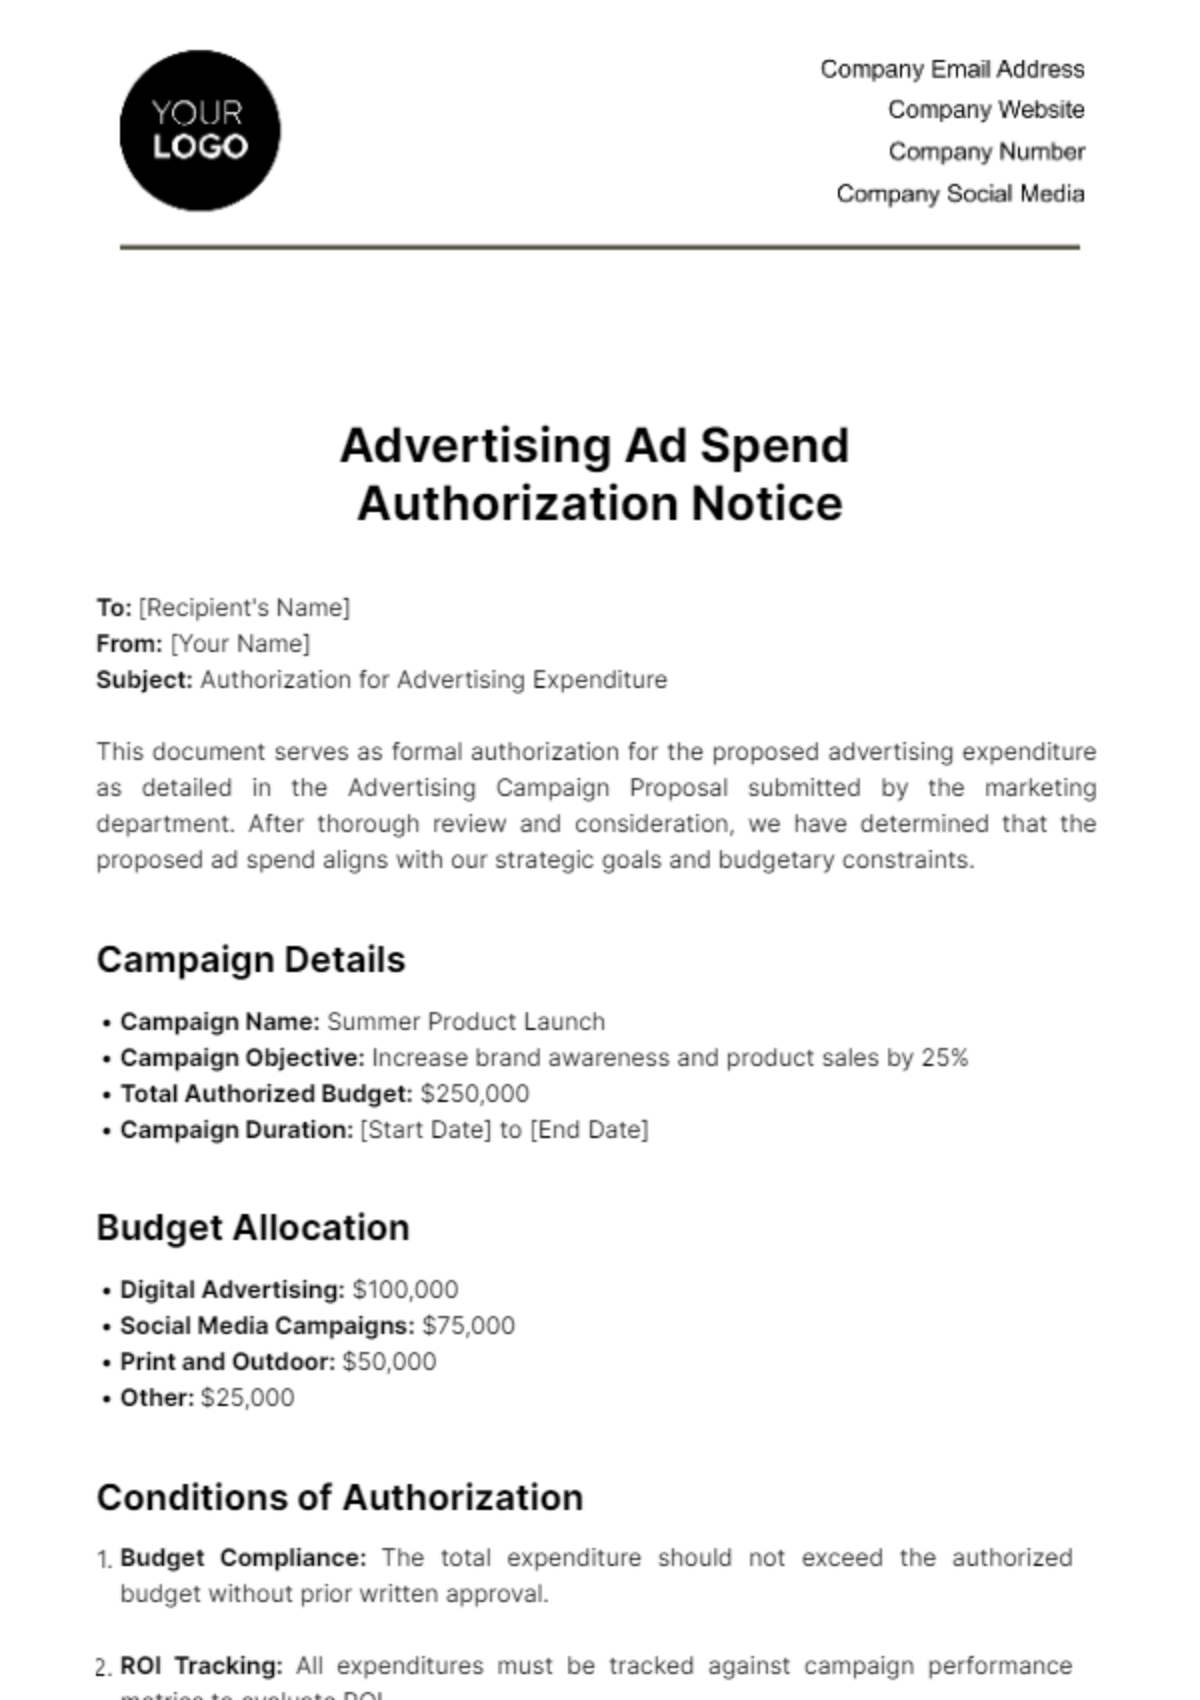 Free Advertising Ad Spend Authorization Notice Template